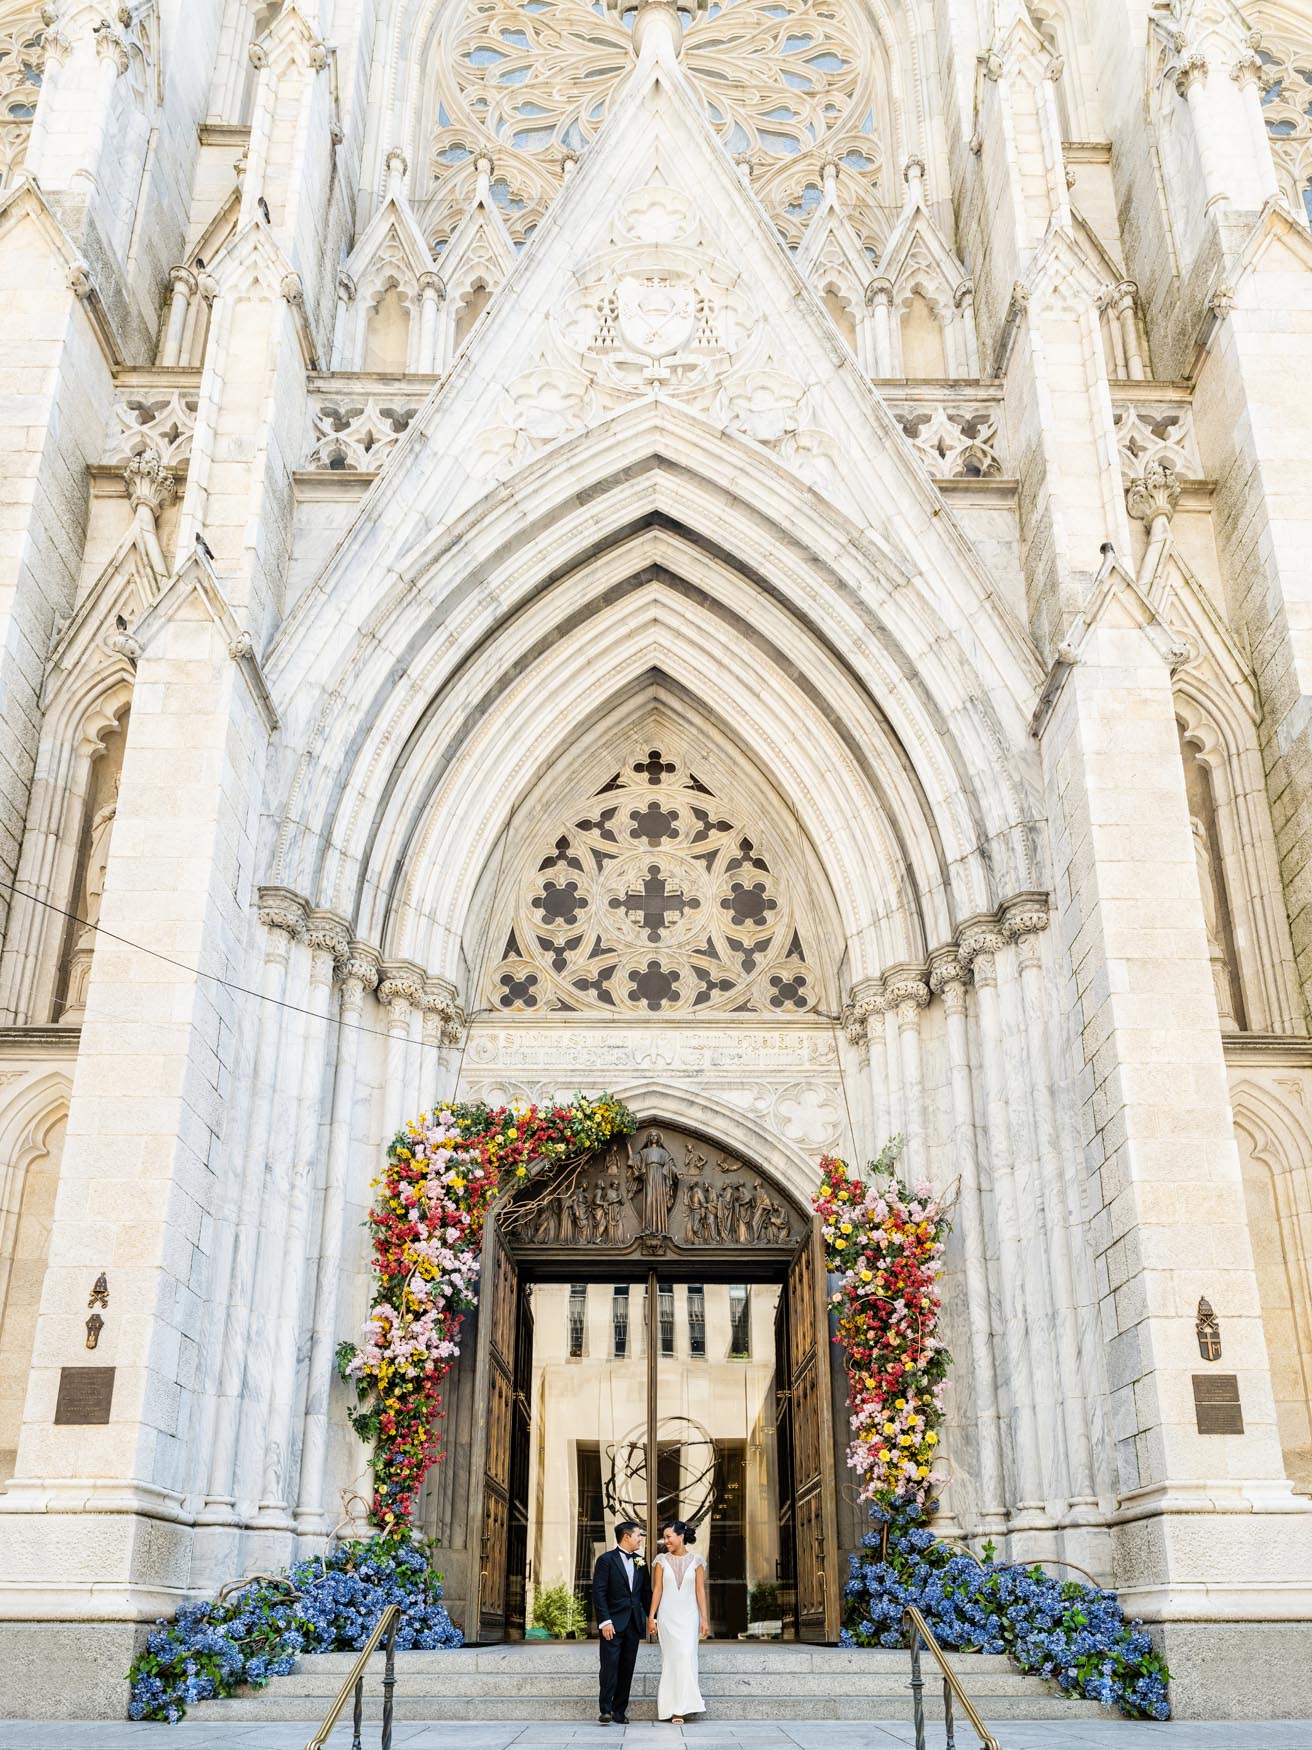 A wide shot of a Filipino couple, posing for wedding photos outside a cathedral